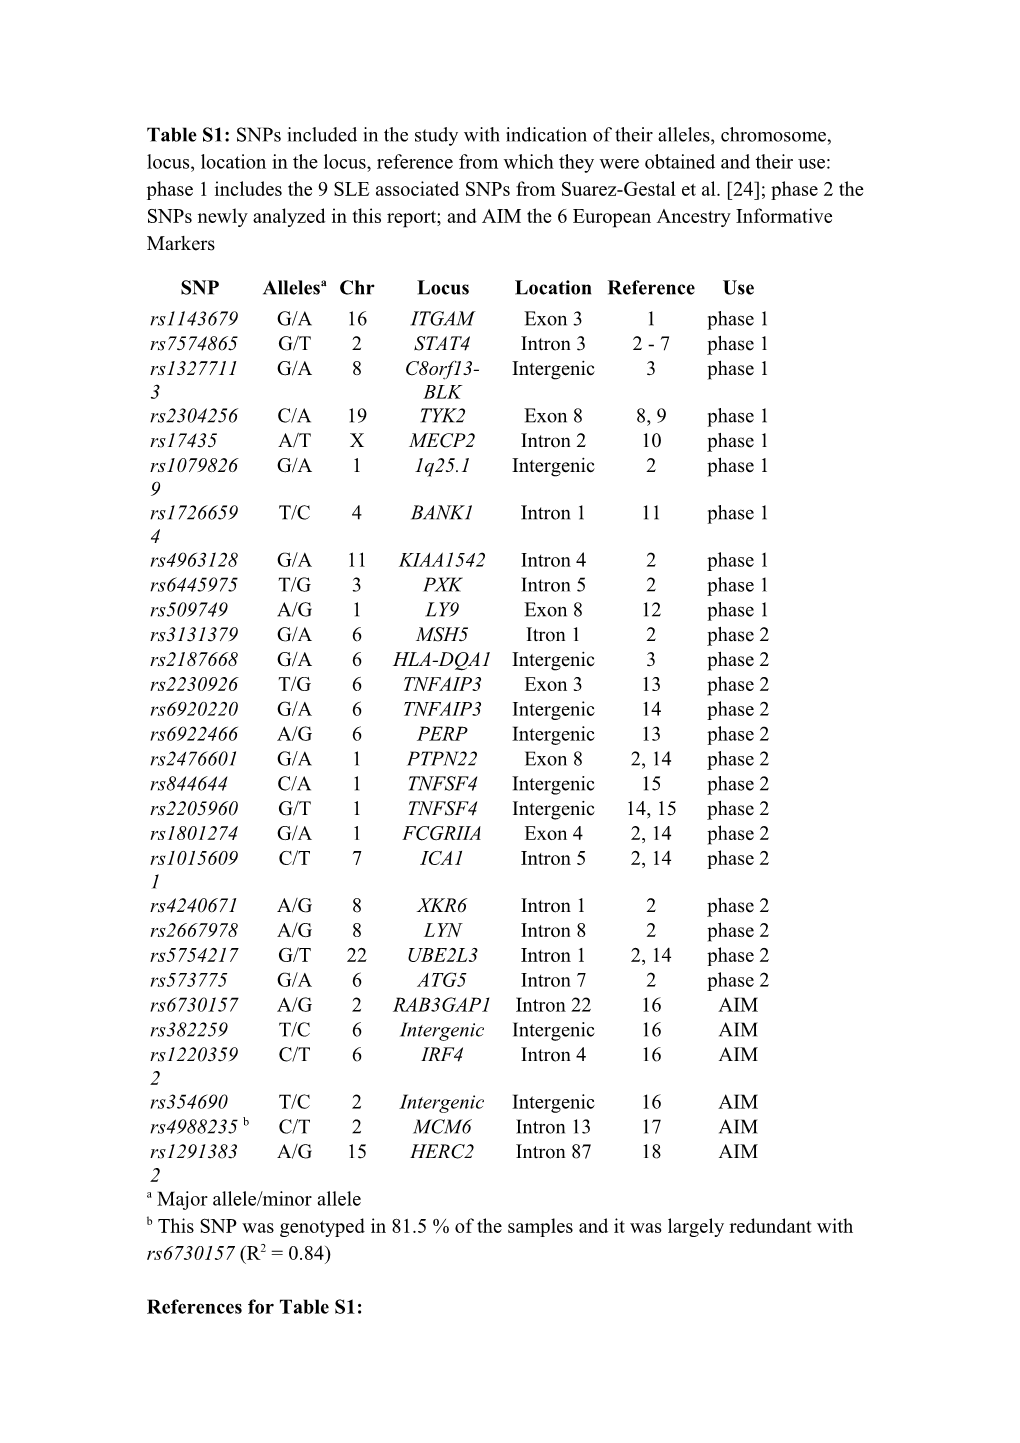 Supplementary Table 1: Snps Included in the Study with Indication of Their Alleles, Chromosome